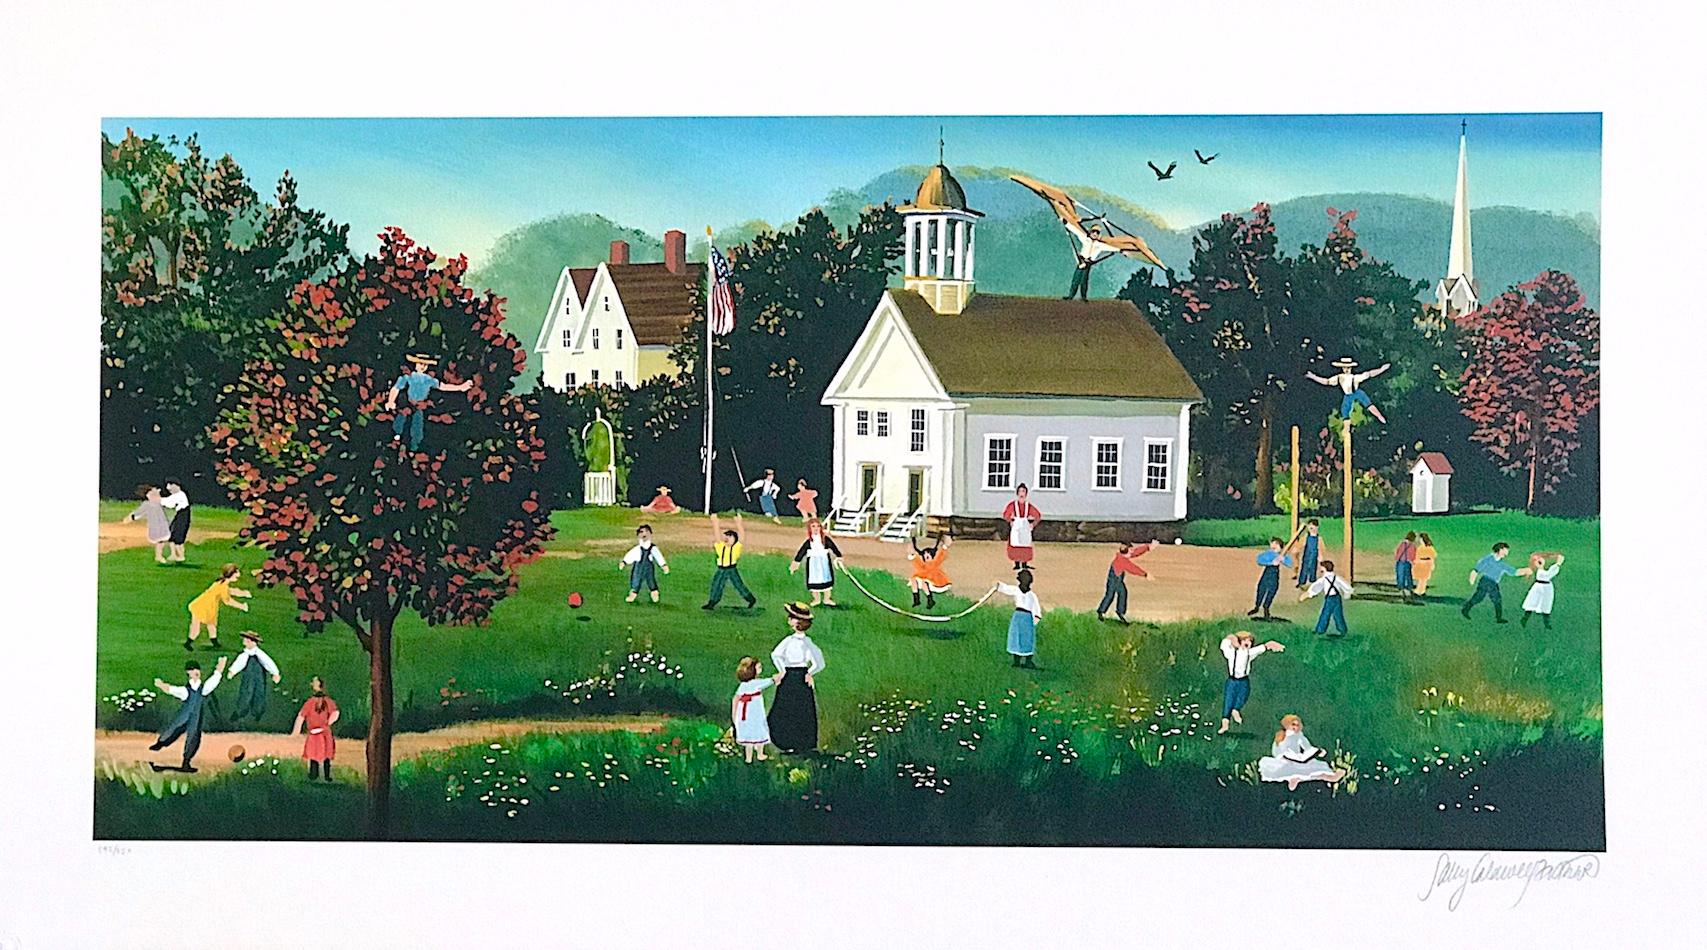 RECESS Signed Lithograph, New England Schoolhouse, Children, Teacher, Playground - Print by Sally Caldwell-Fisher